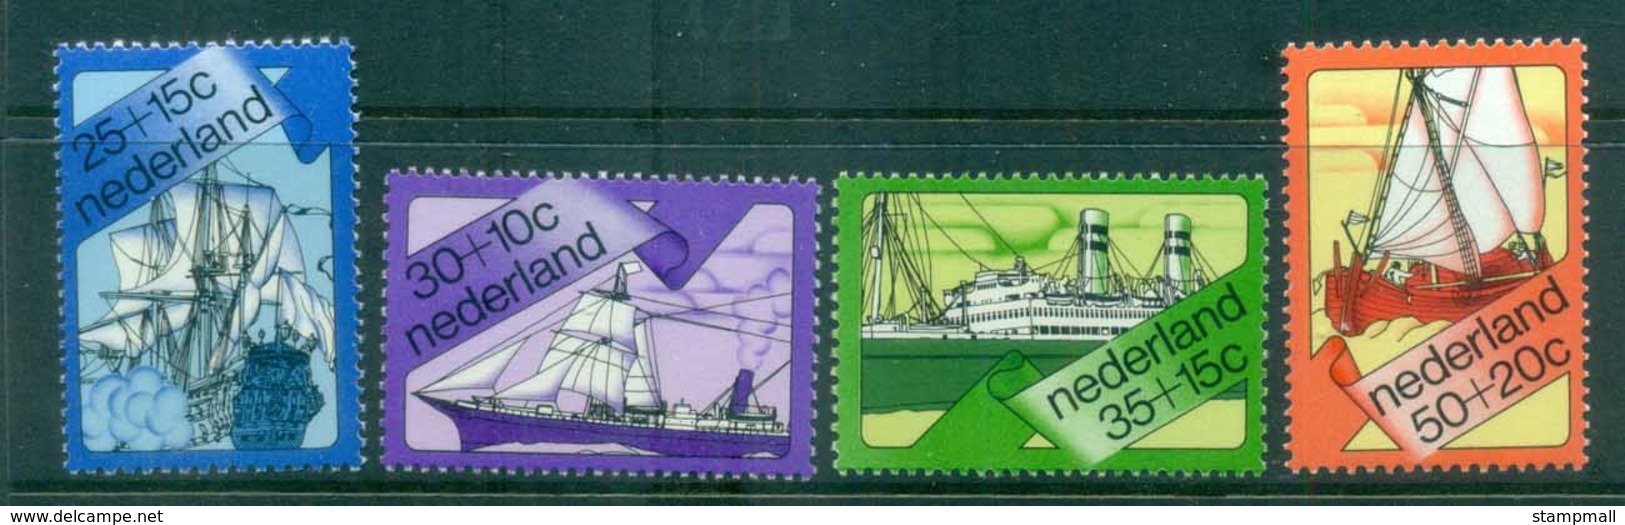 Netherlands 1973 Charity, Social & Cultural Purposes, Ships MUH Lot76570 - Unclassified